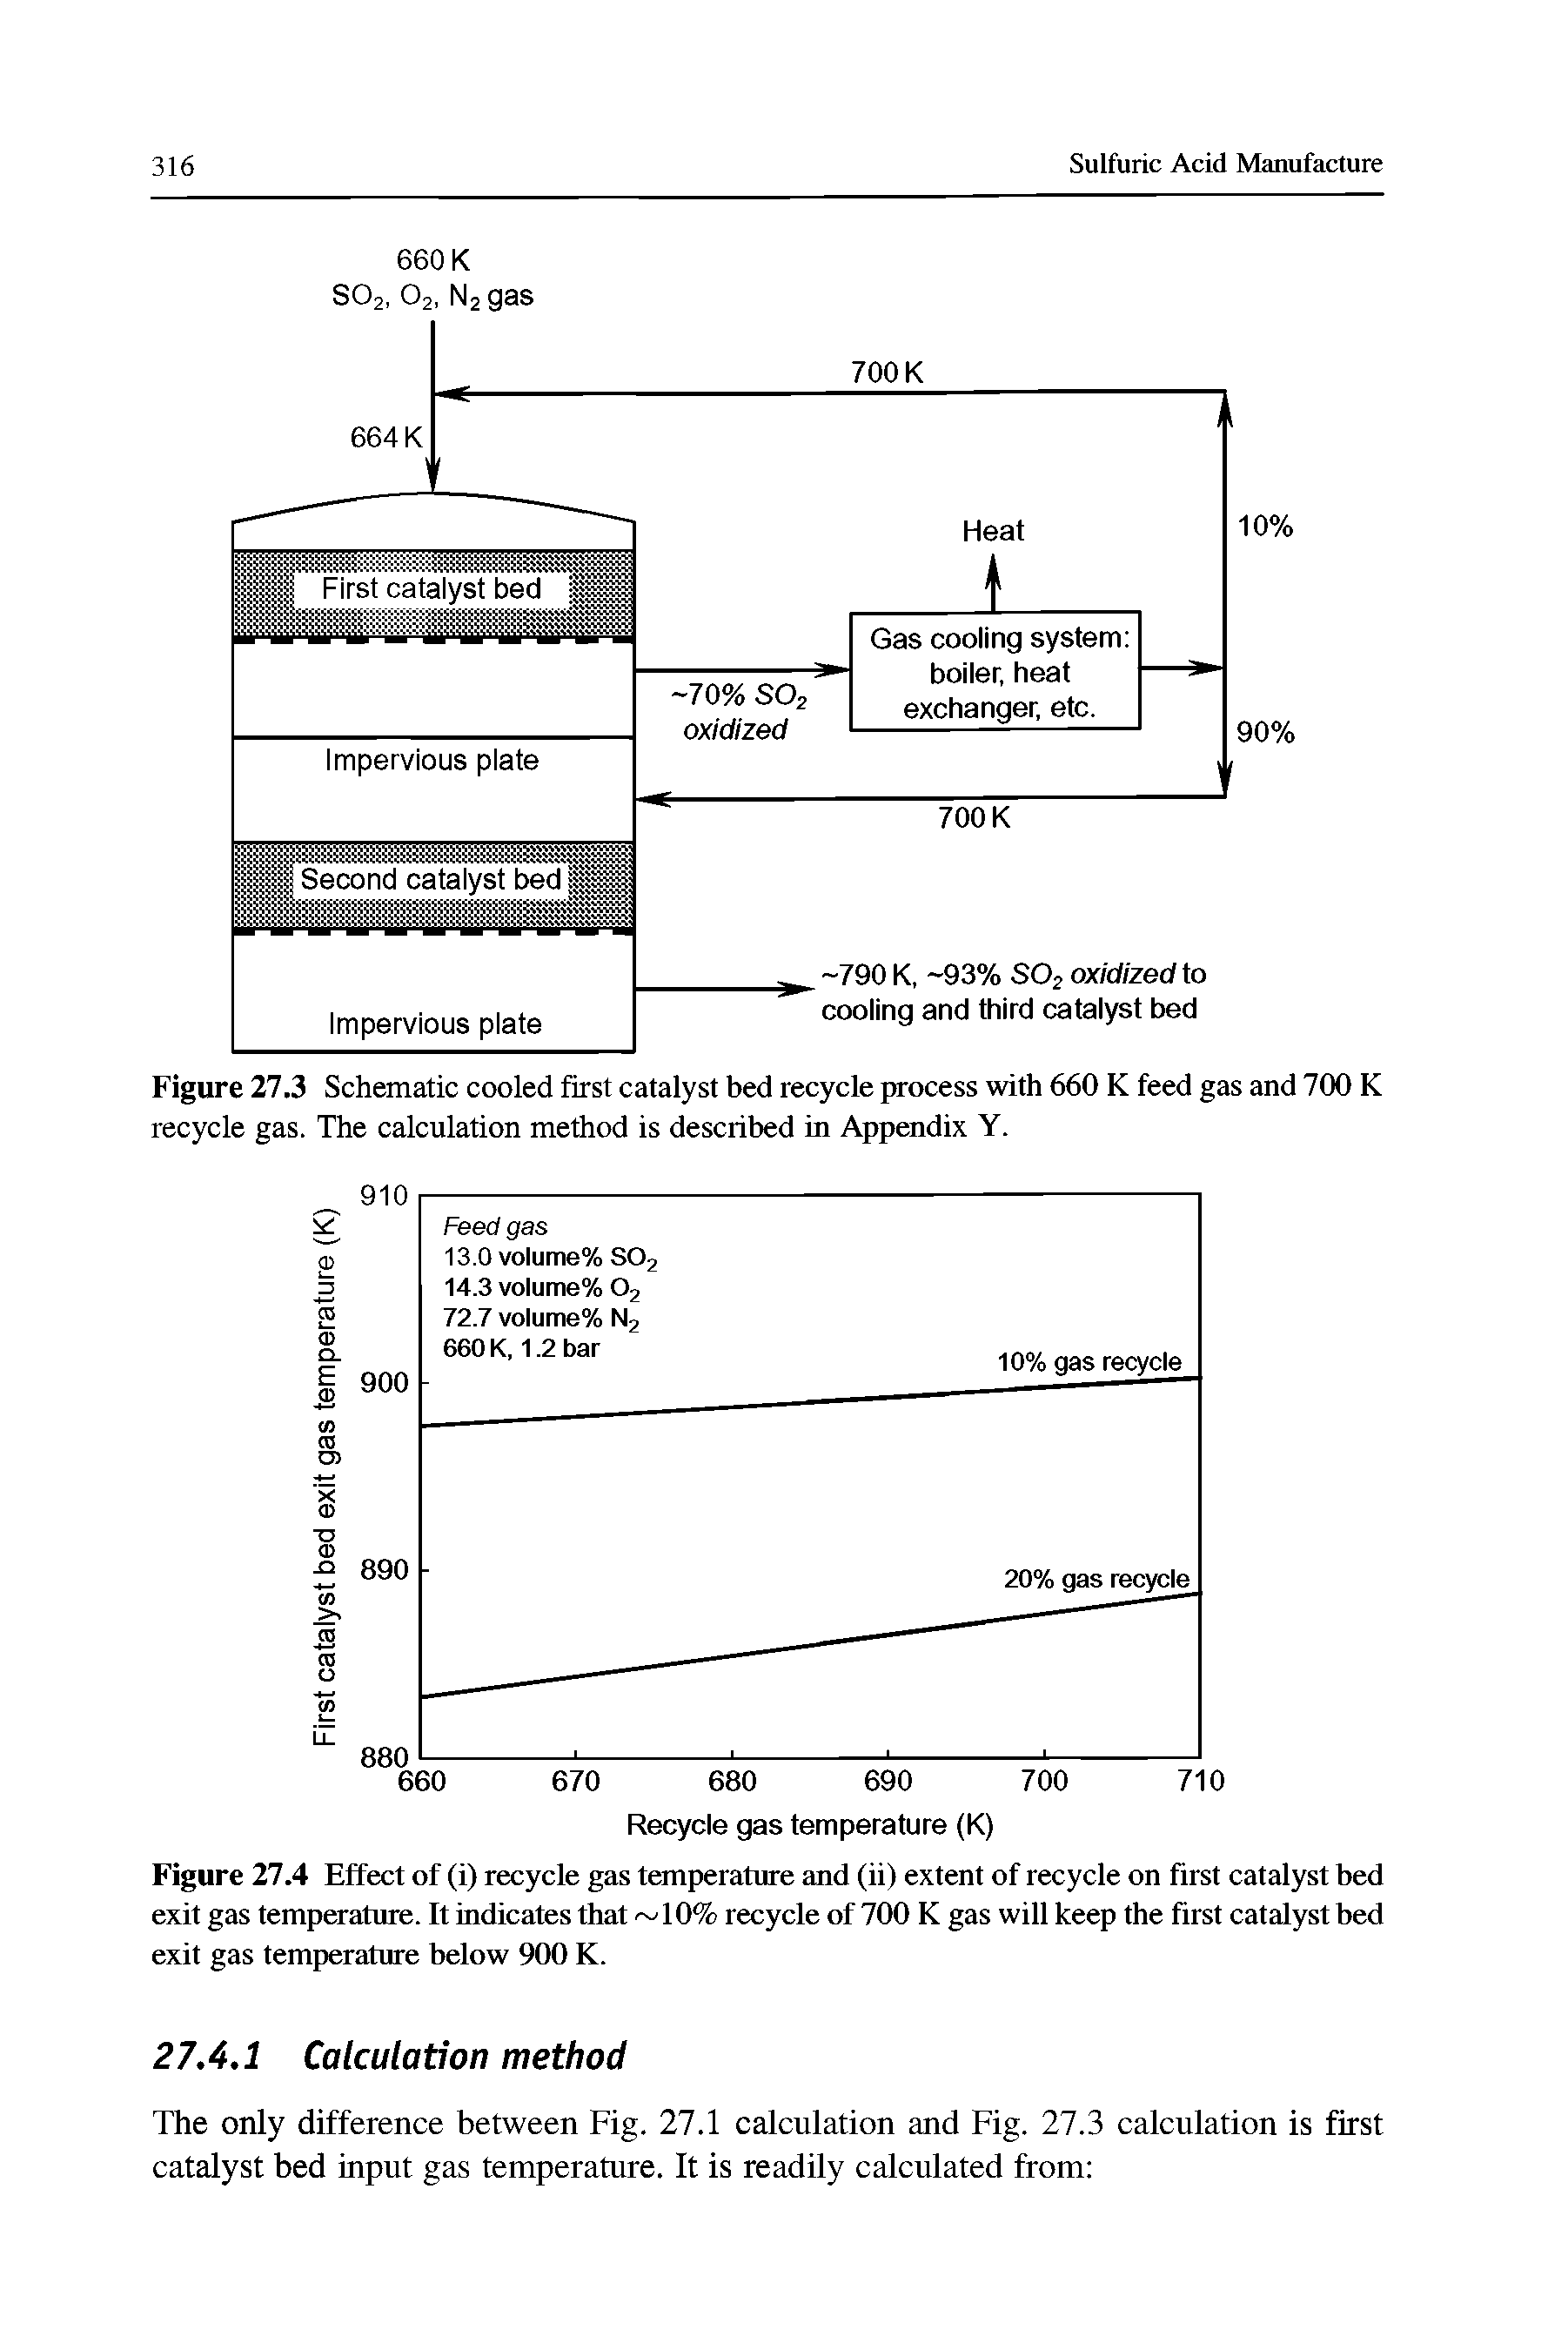 Figure 27.3 Schematic cooled first catalyst bed recycle process with 660 K feed gas and 700 K recycle gas. The calculation method is described in Appendix Y.